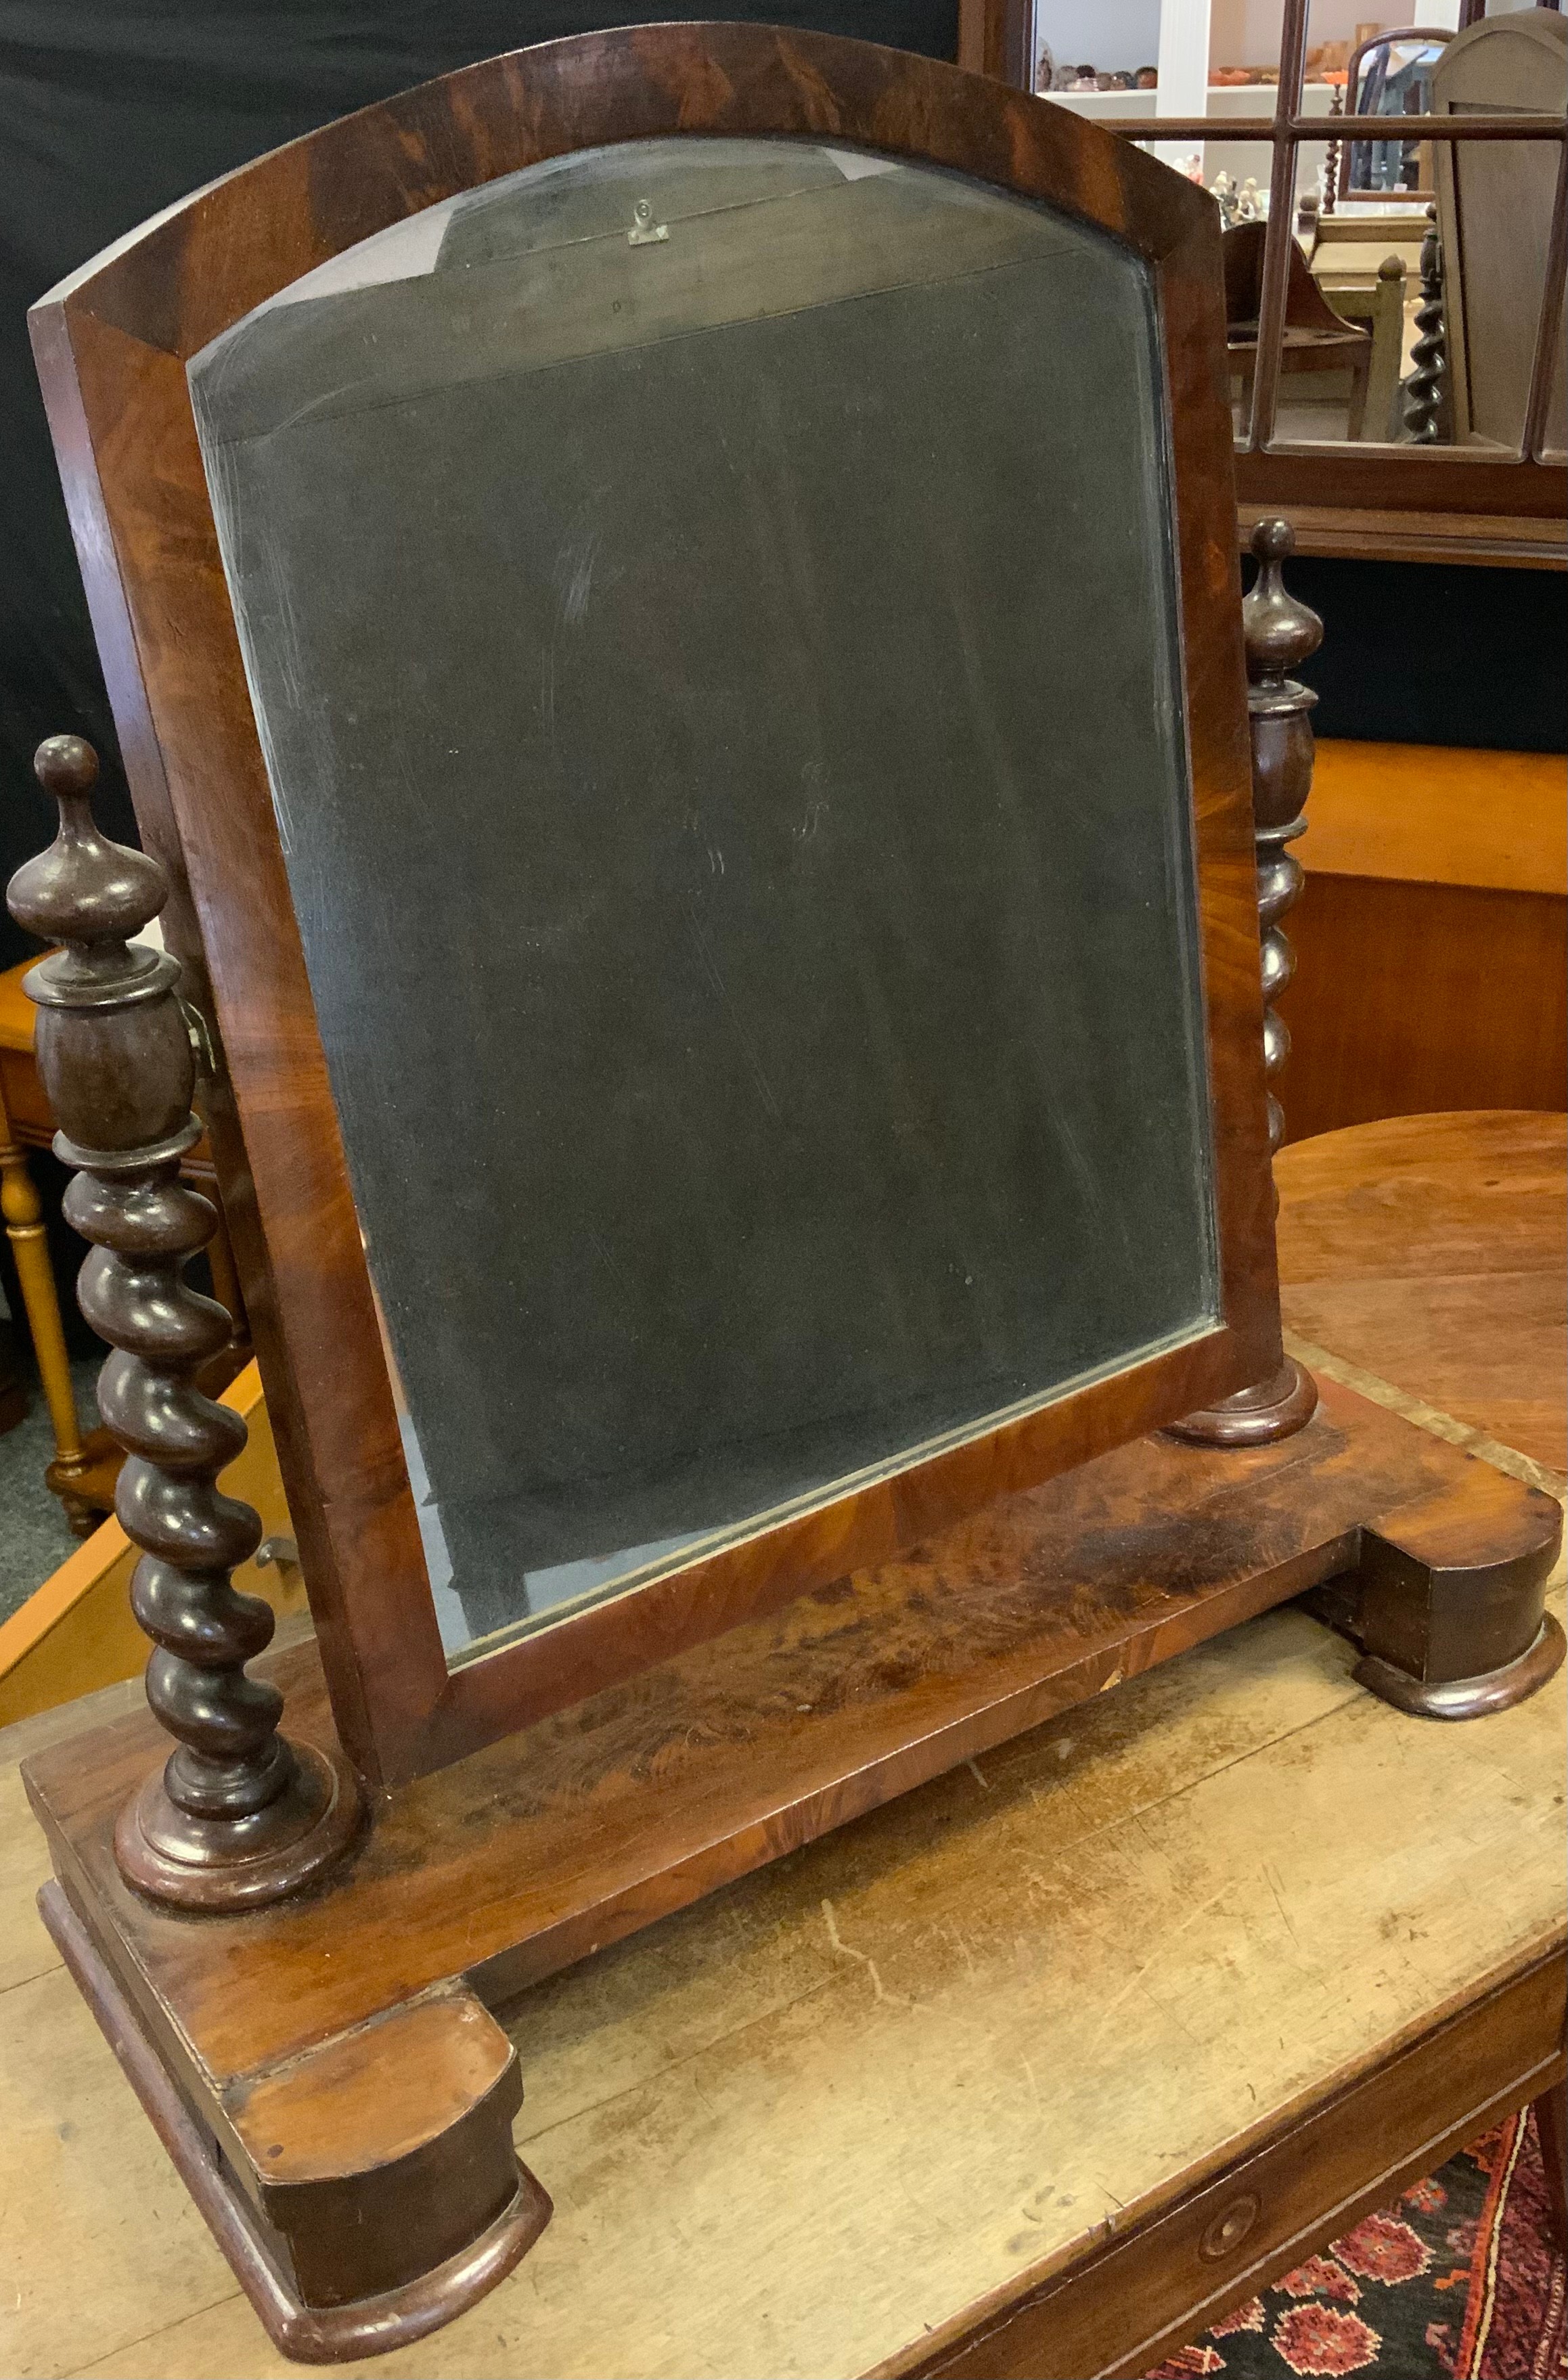 An early Victorian mahogany toilet mirror, having an arch-top mirror with barley-twist supports on a